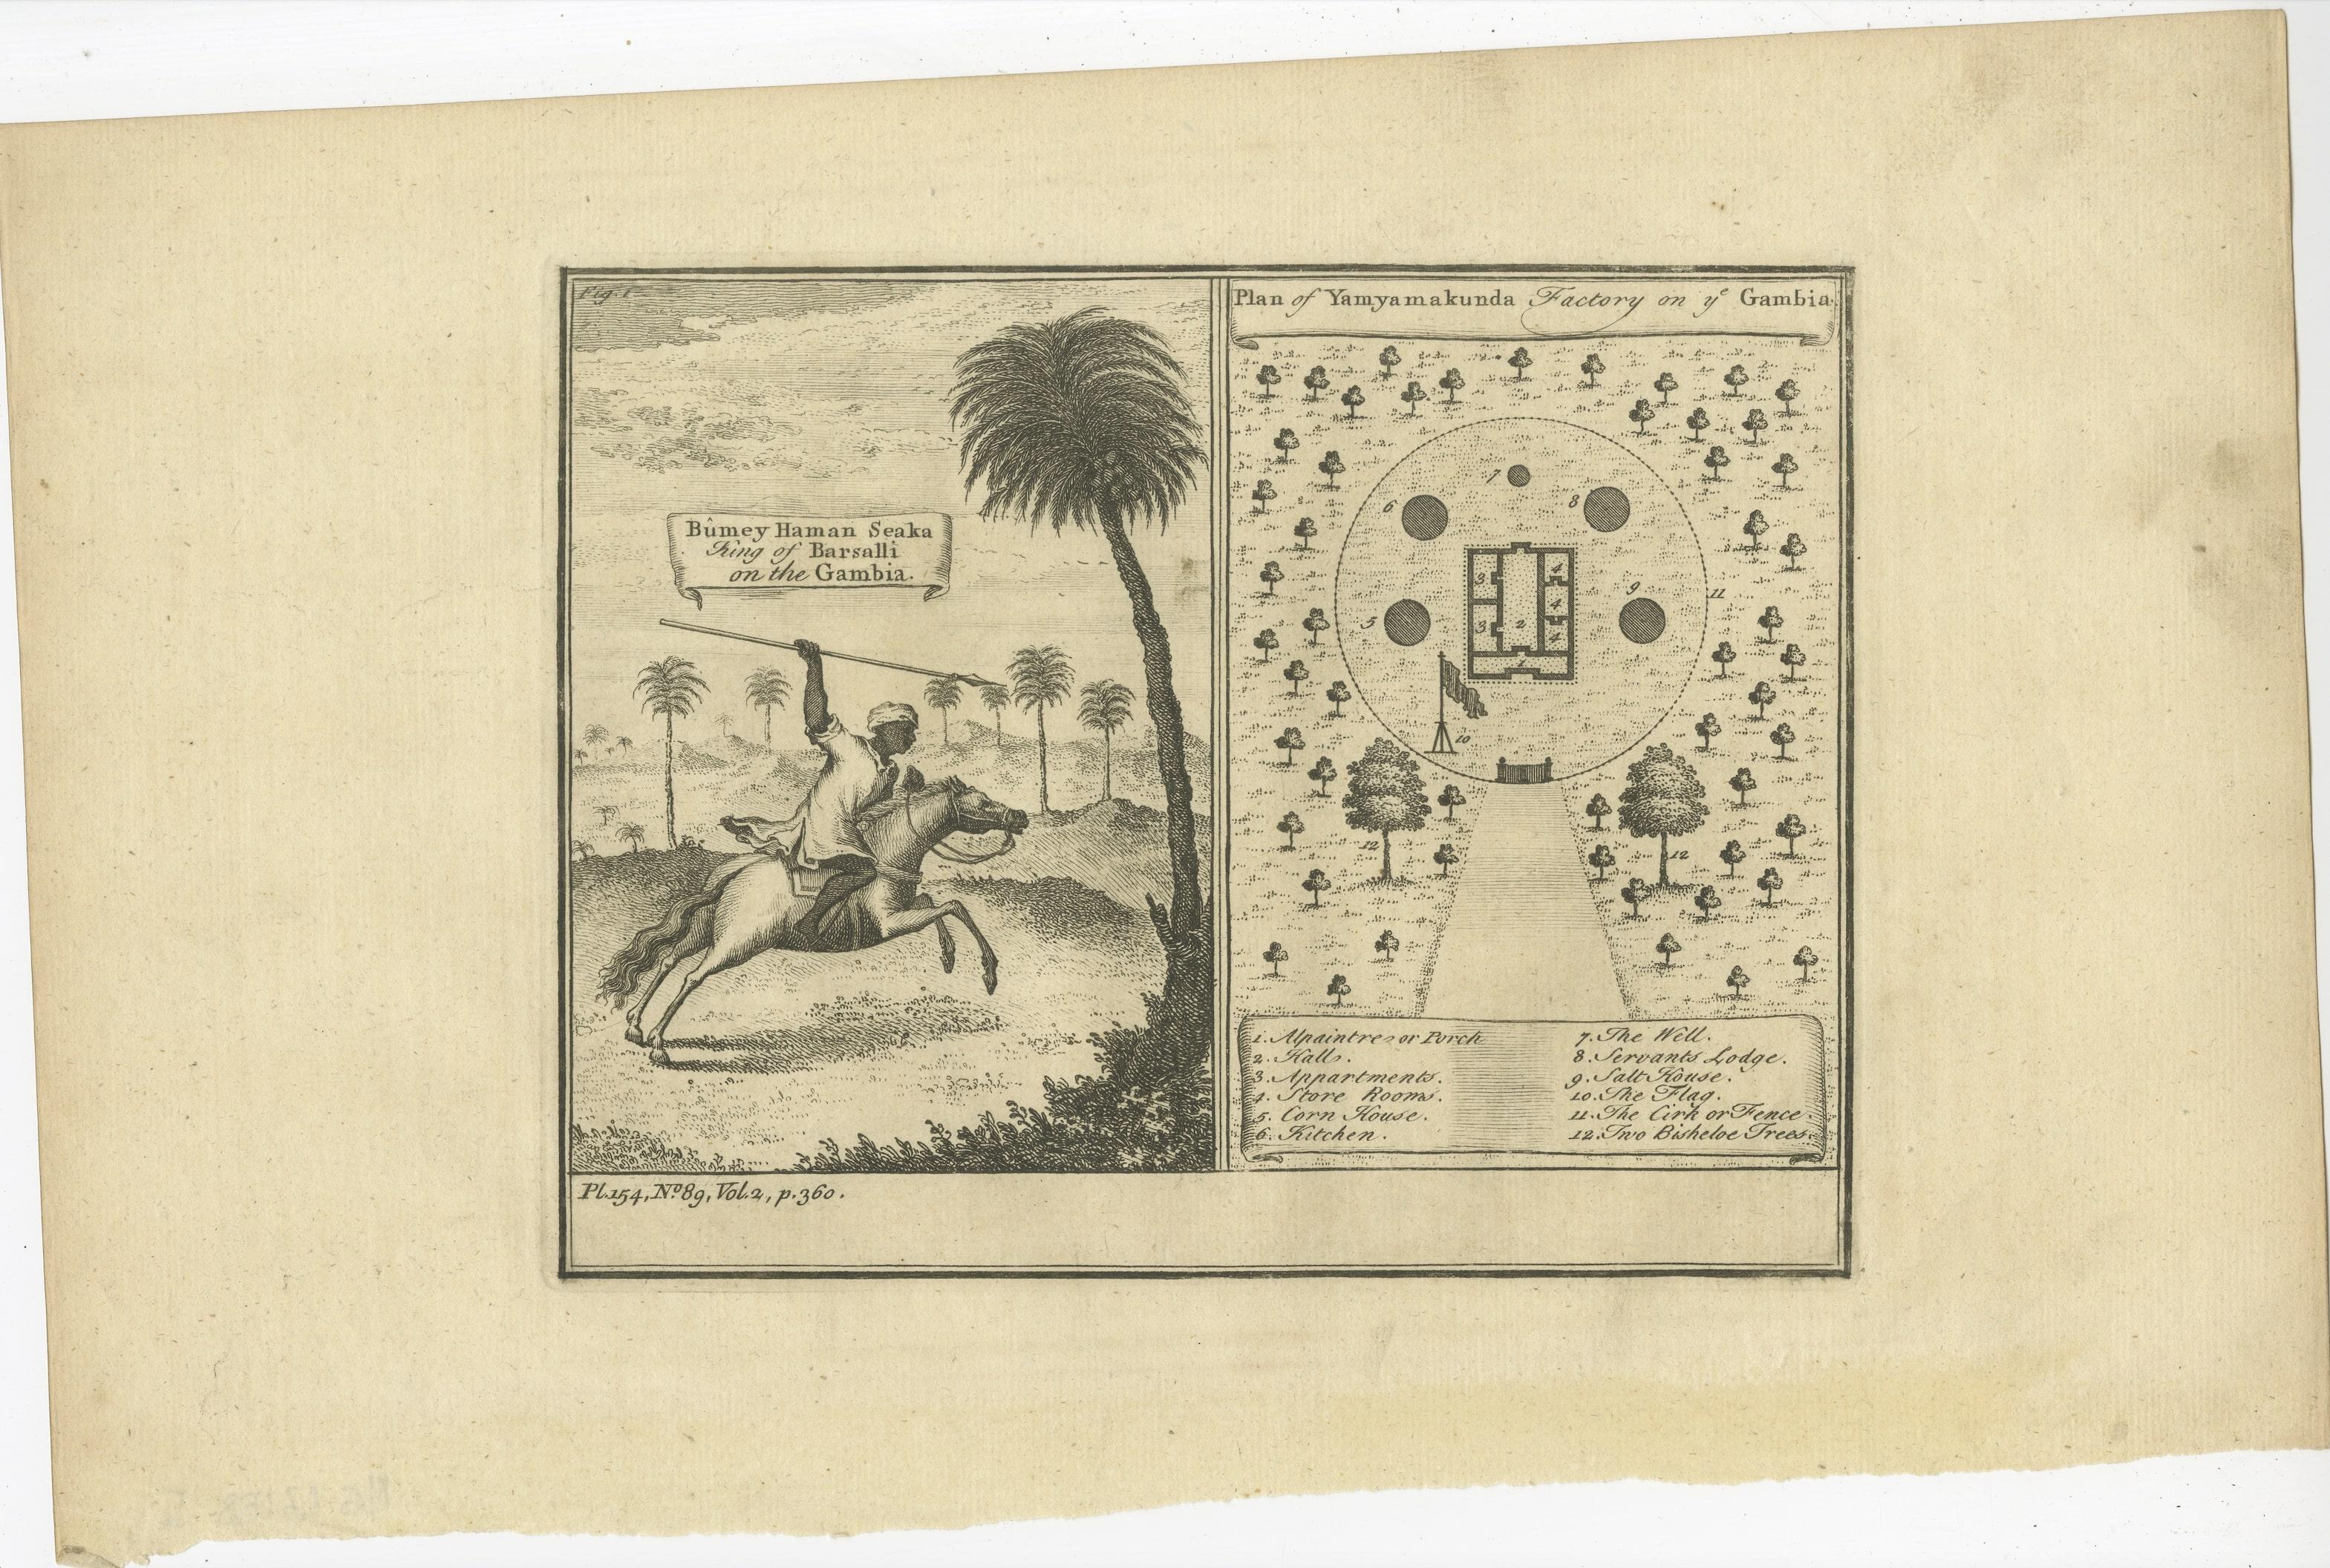 Antique Print of the King of Barsalli & the Yamyamakunda Factory, Gambia, C1730 In Good Condition For Sale In Langweer, NL